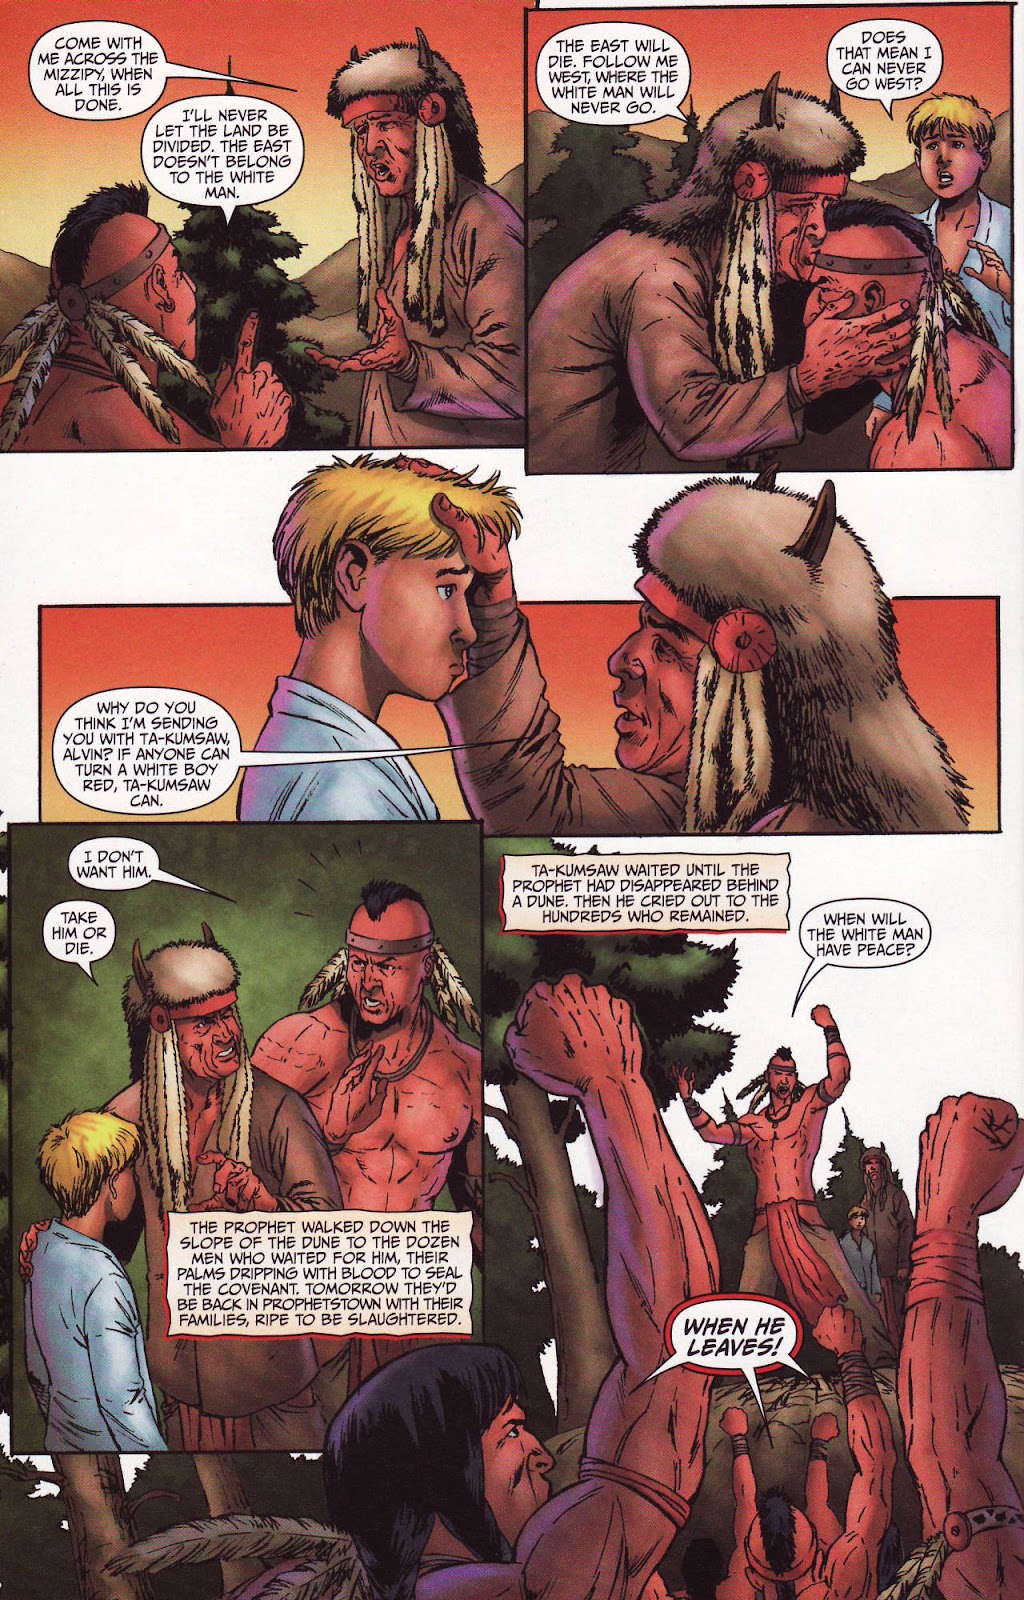 Red Prophet: The Tales of Alvin Maker issue 8 - Page 6